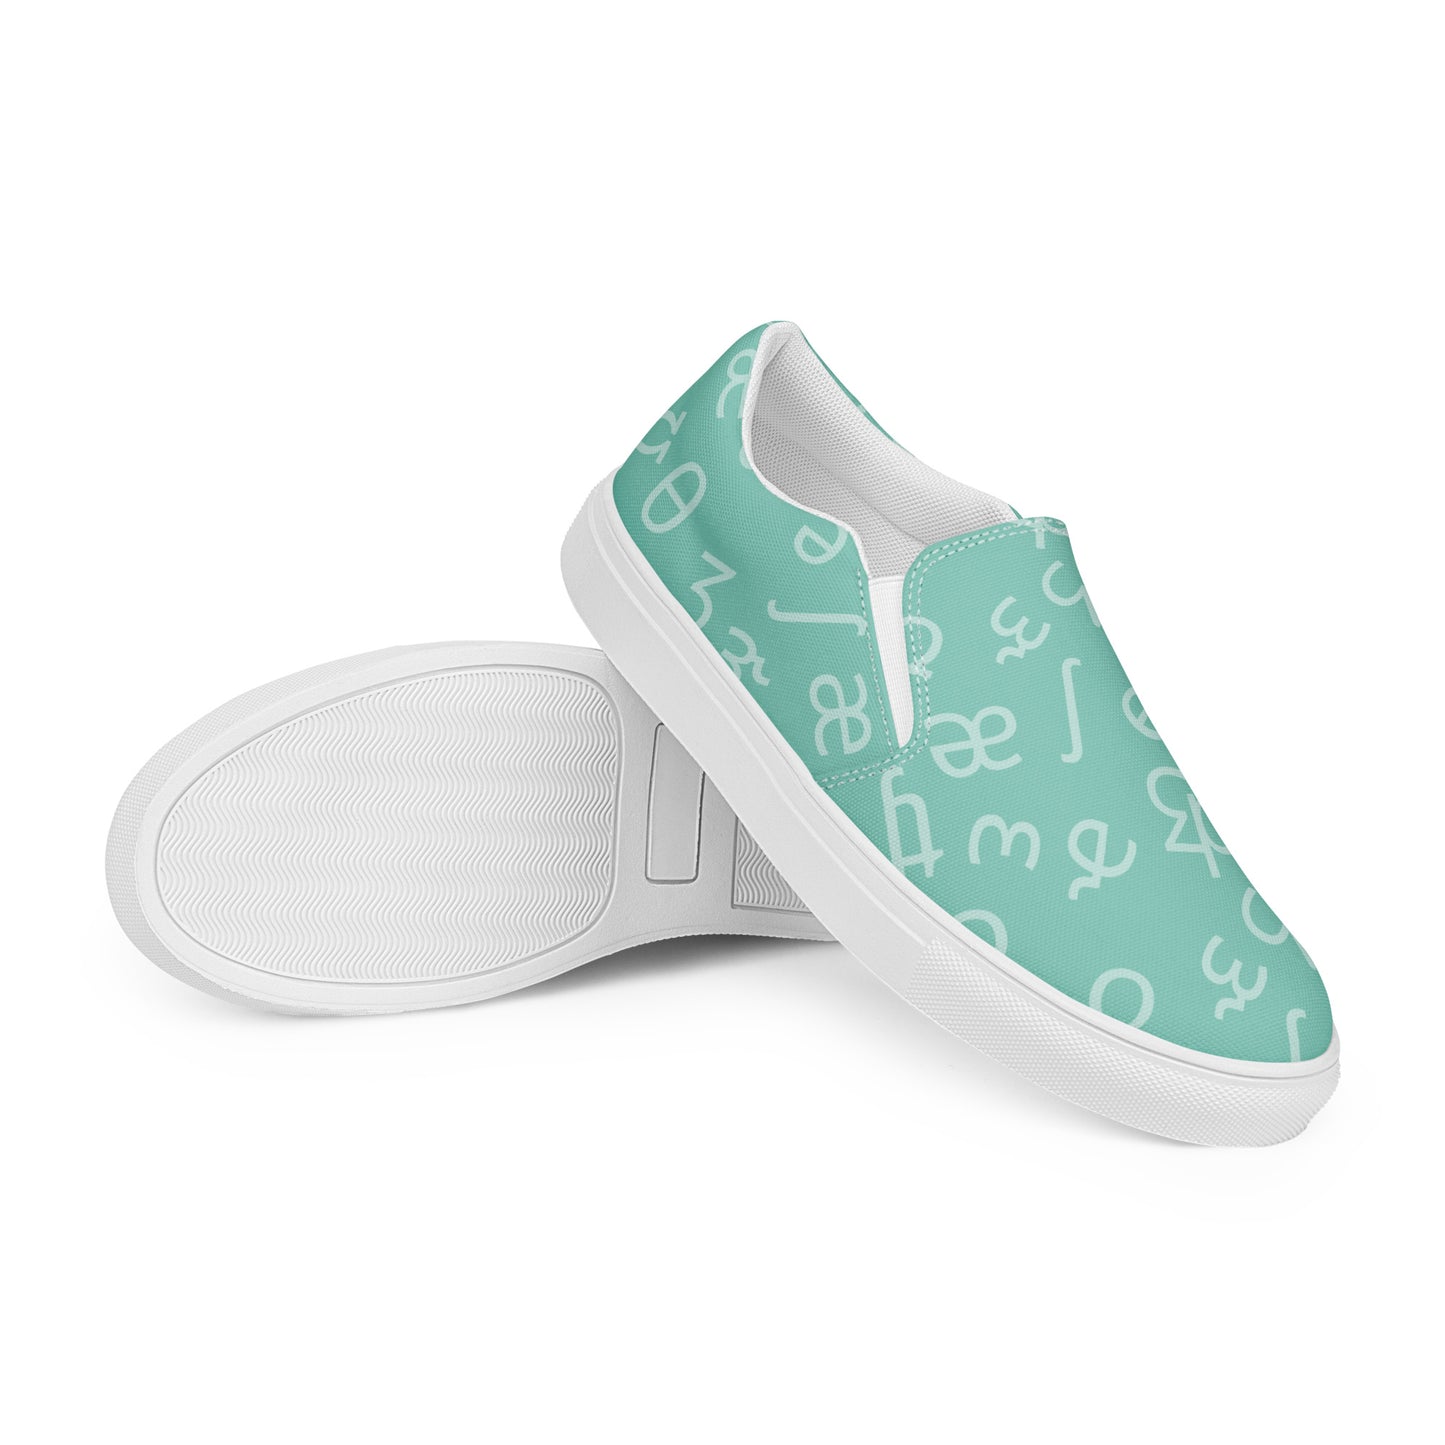 Mint IPA Slip-on Canvas Shoes (Women's Sizes)